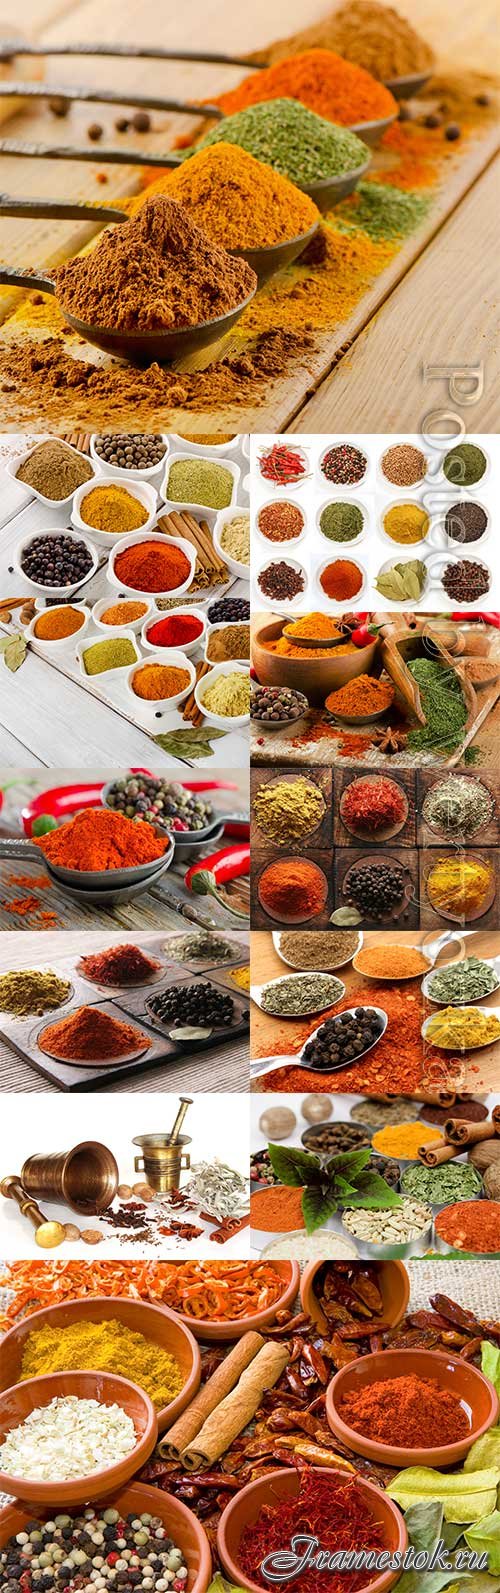 Spices in various containers stock photo